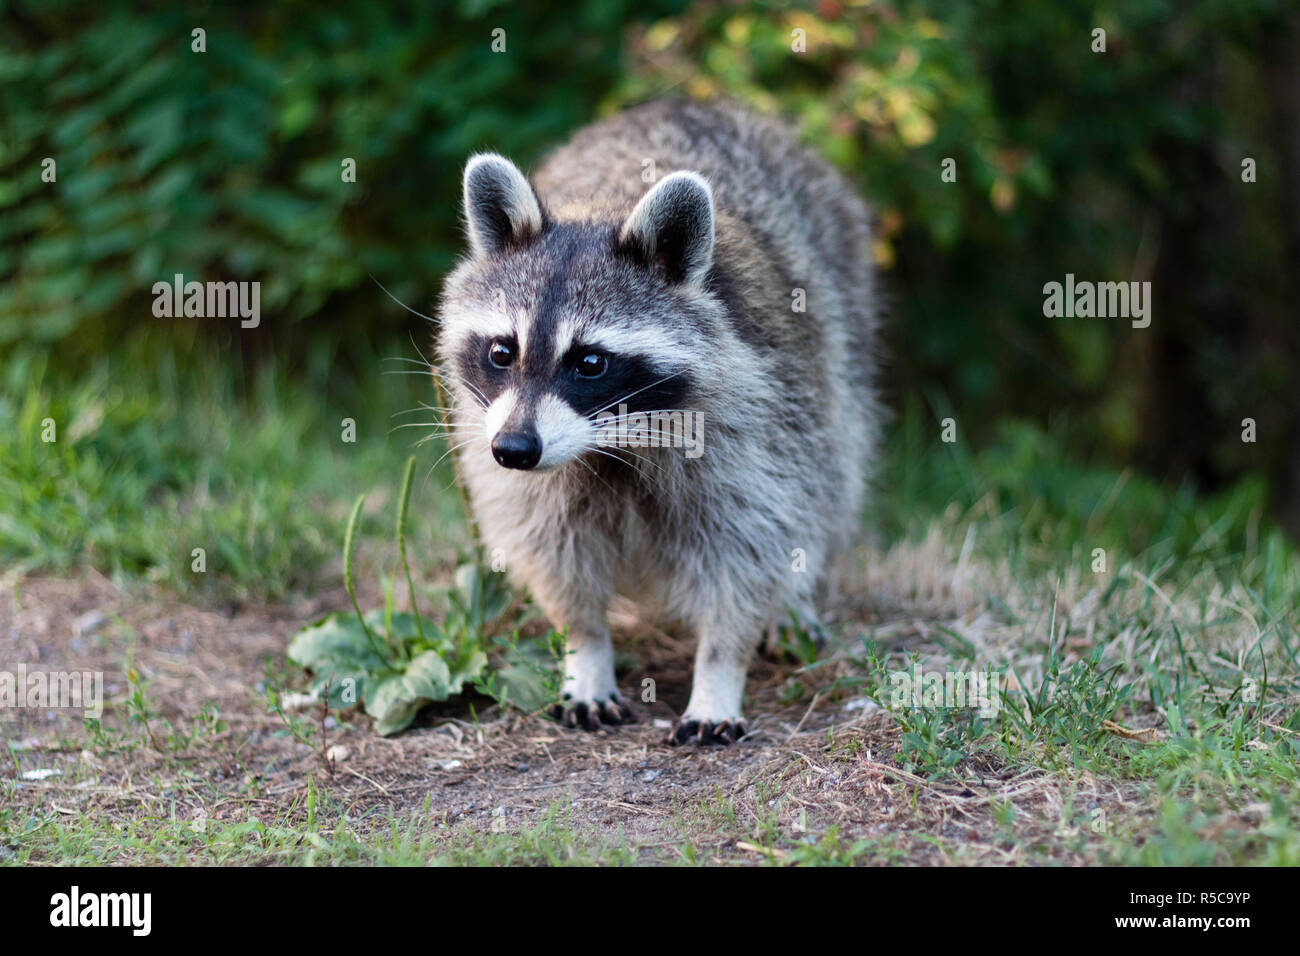 A raccoon on the Mount-Royal in Montreal, Canada. Raton laveur sur le Mont-Royal. Stock Photo